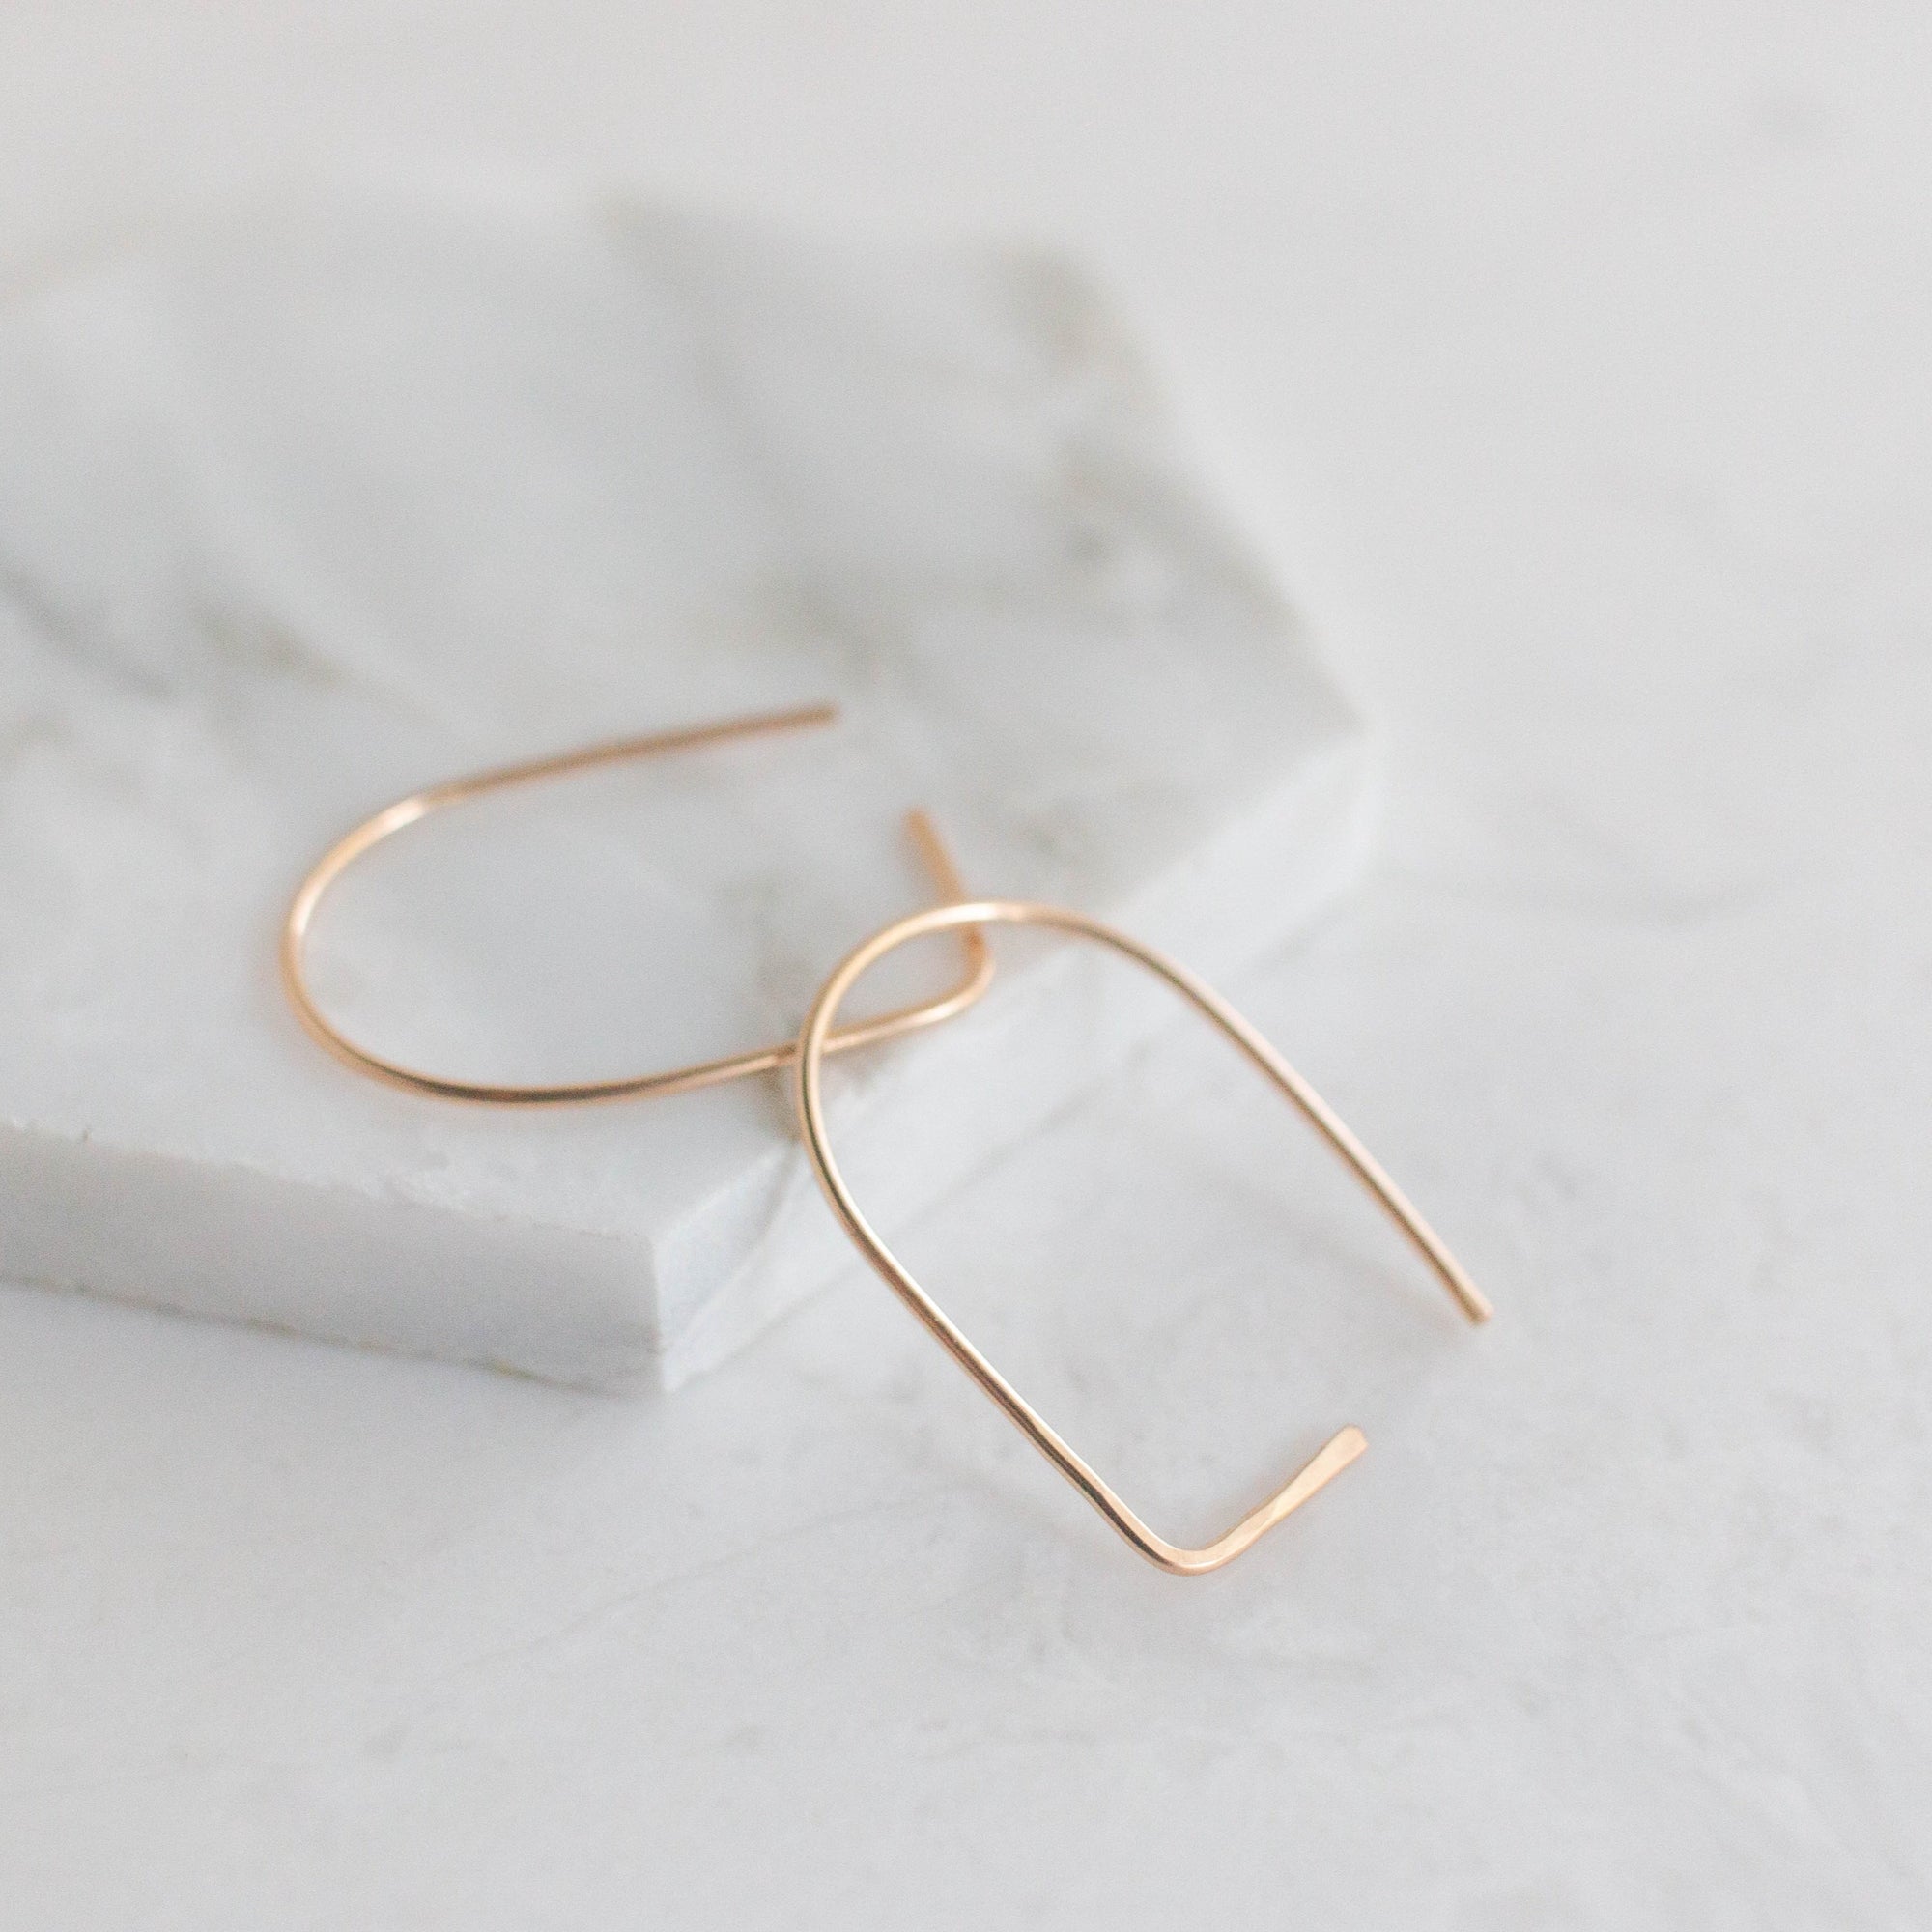 gold archway earrings